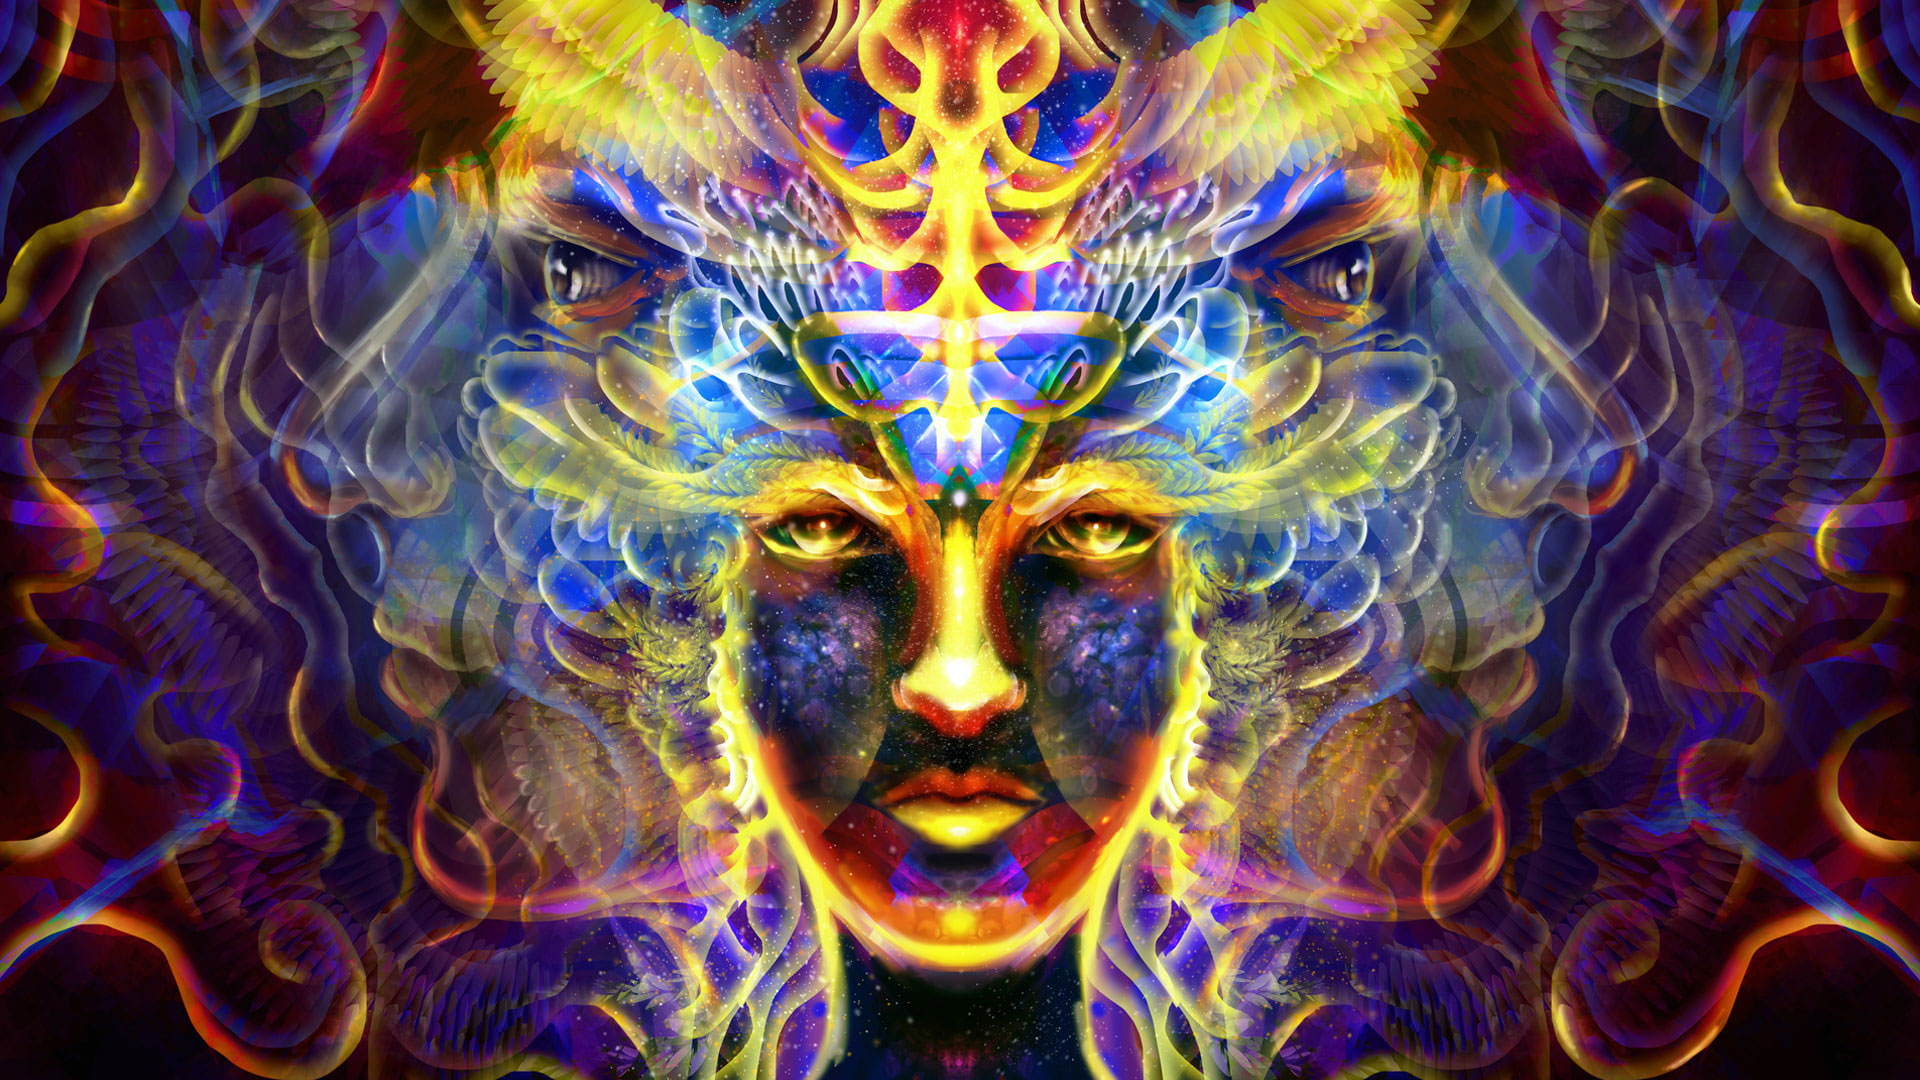 Trippy Wallpaper, Psychedelic, Colorful, Fractal, Front View, Portrait -  Wallpaperforu